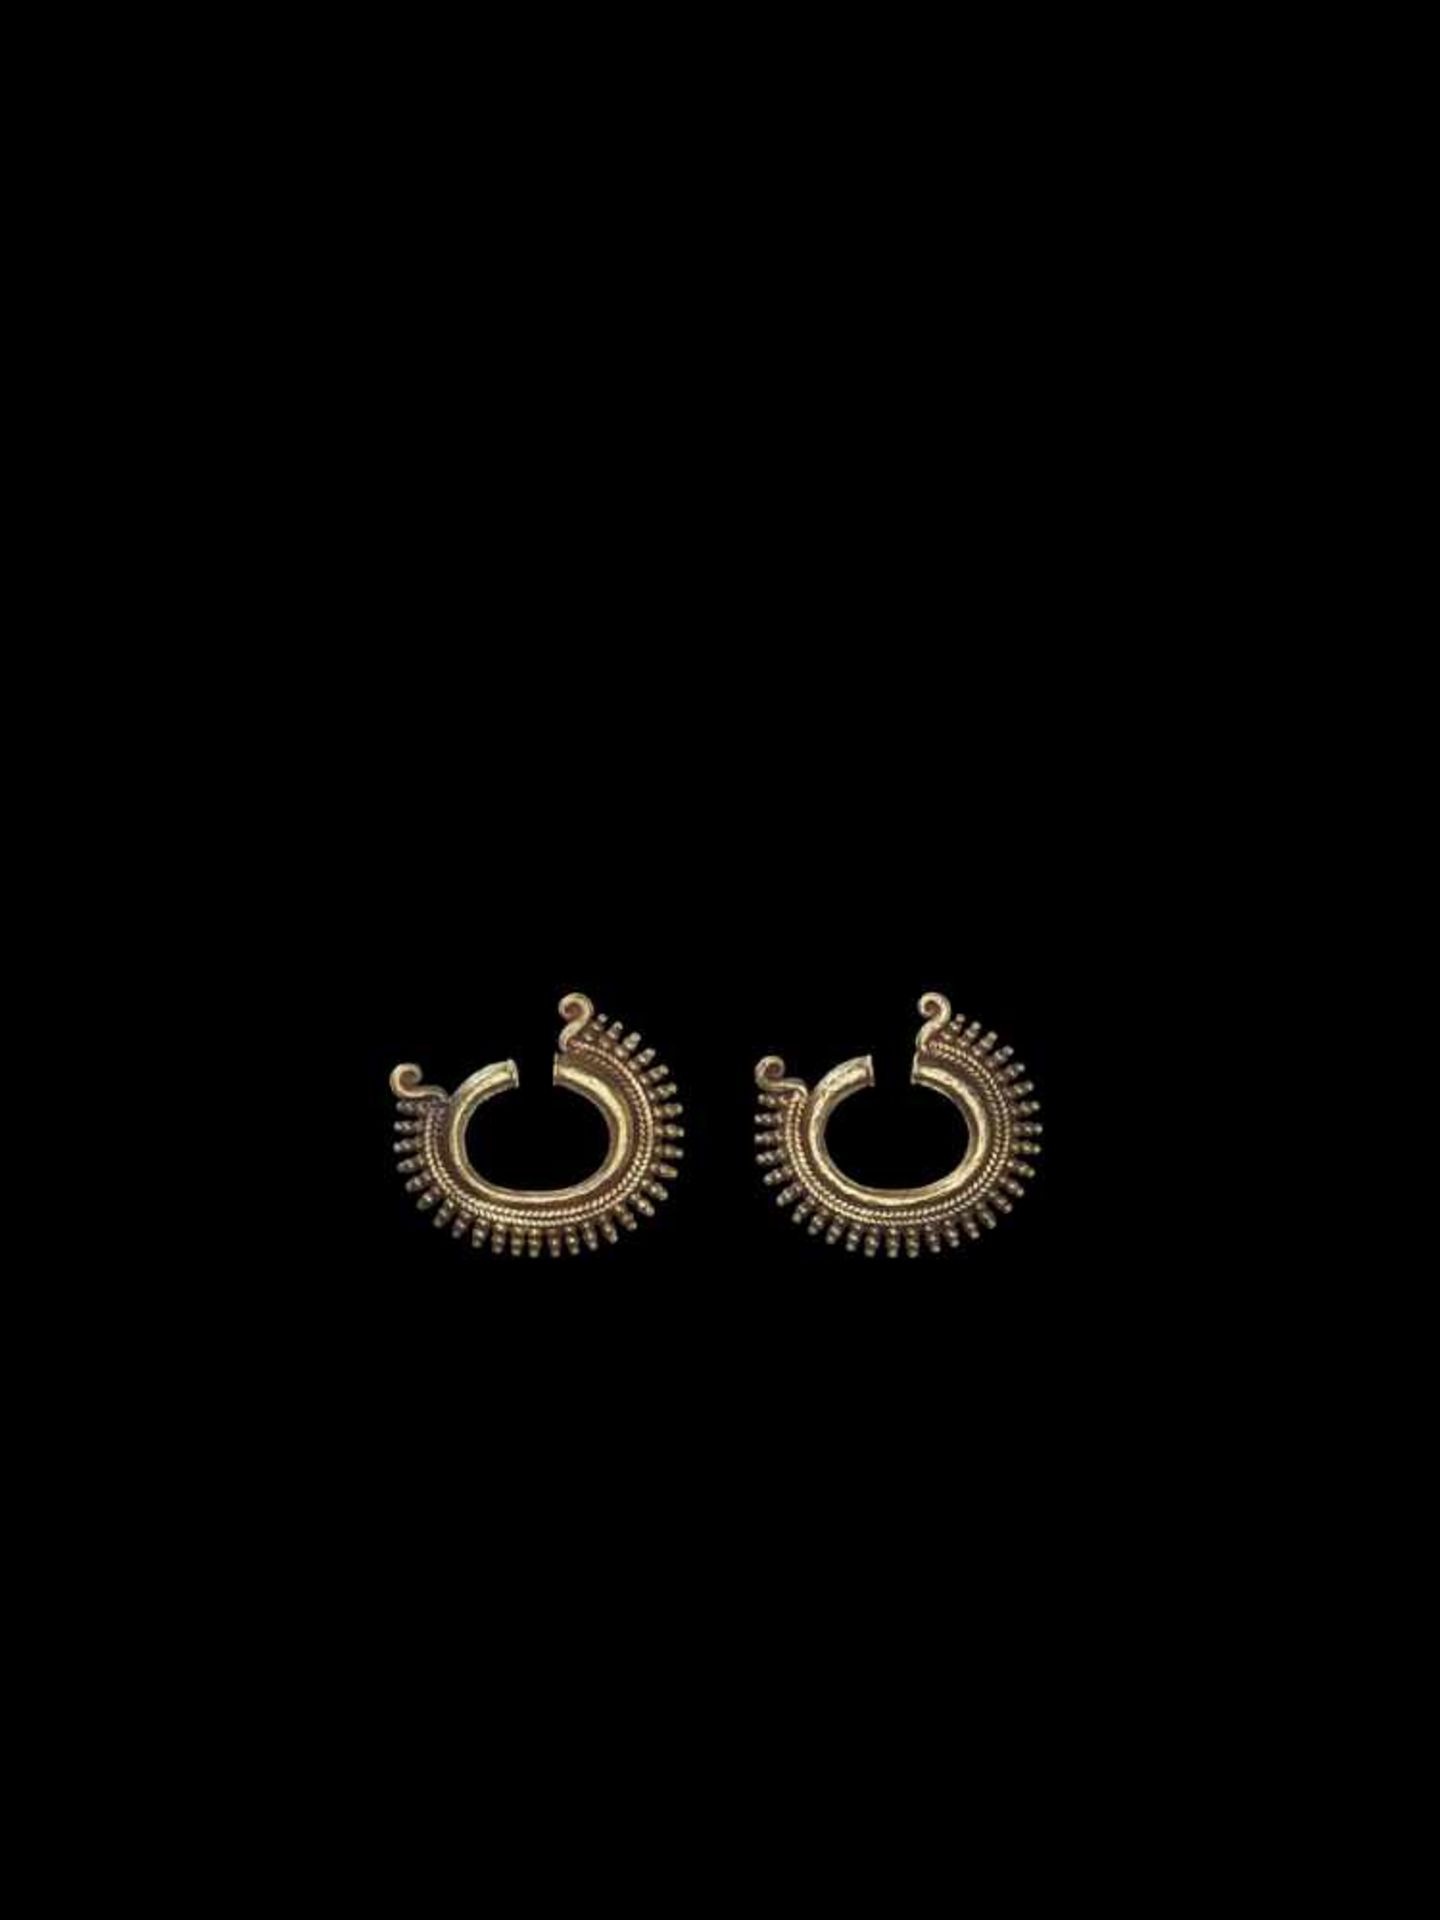 A PAIR OF OPEN RING-SHAPED MINDANAO GOLD EAR ORNAMENTS Philippines, Mindanao, 8th – 13th century.